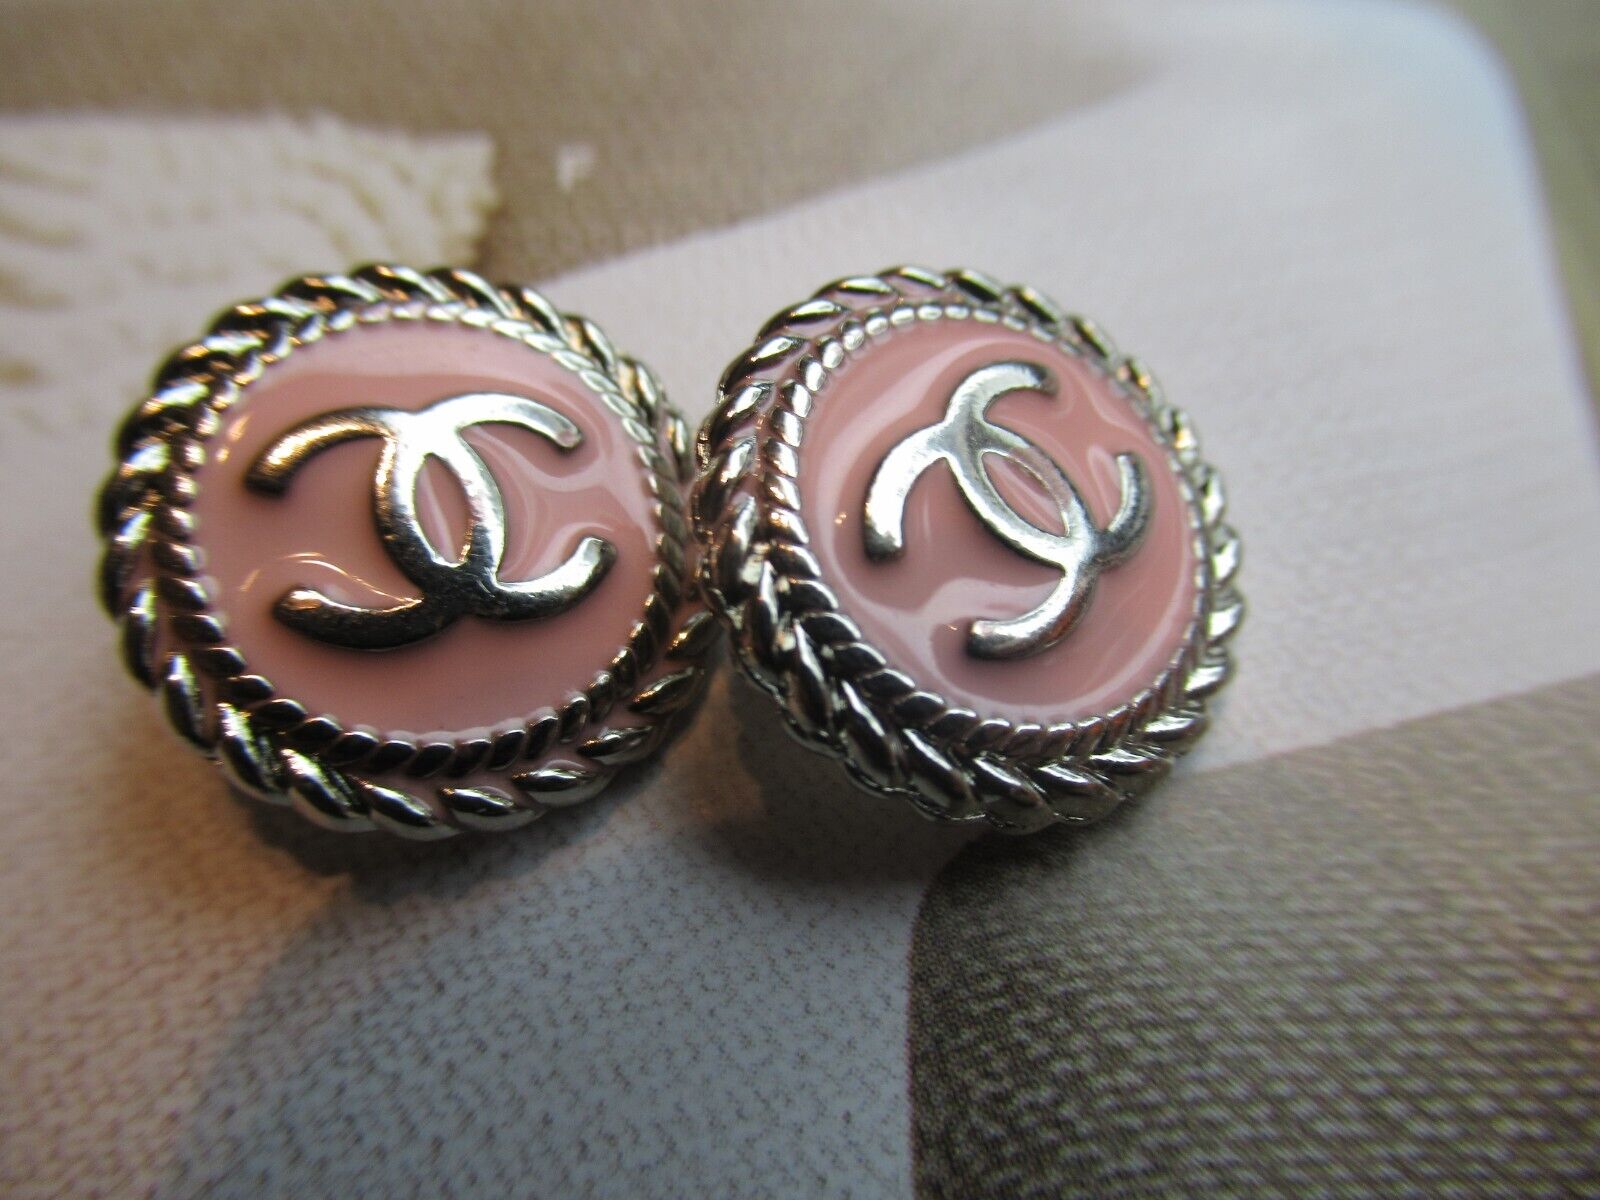 Chanel 2 buttons LIGHT PINK with SILVER tone metal 16mm 